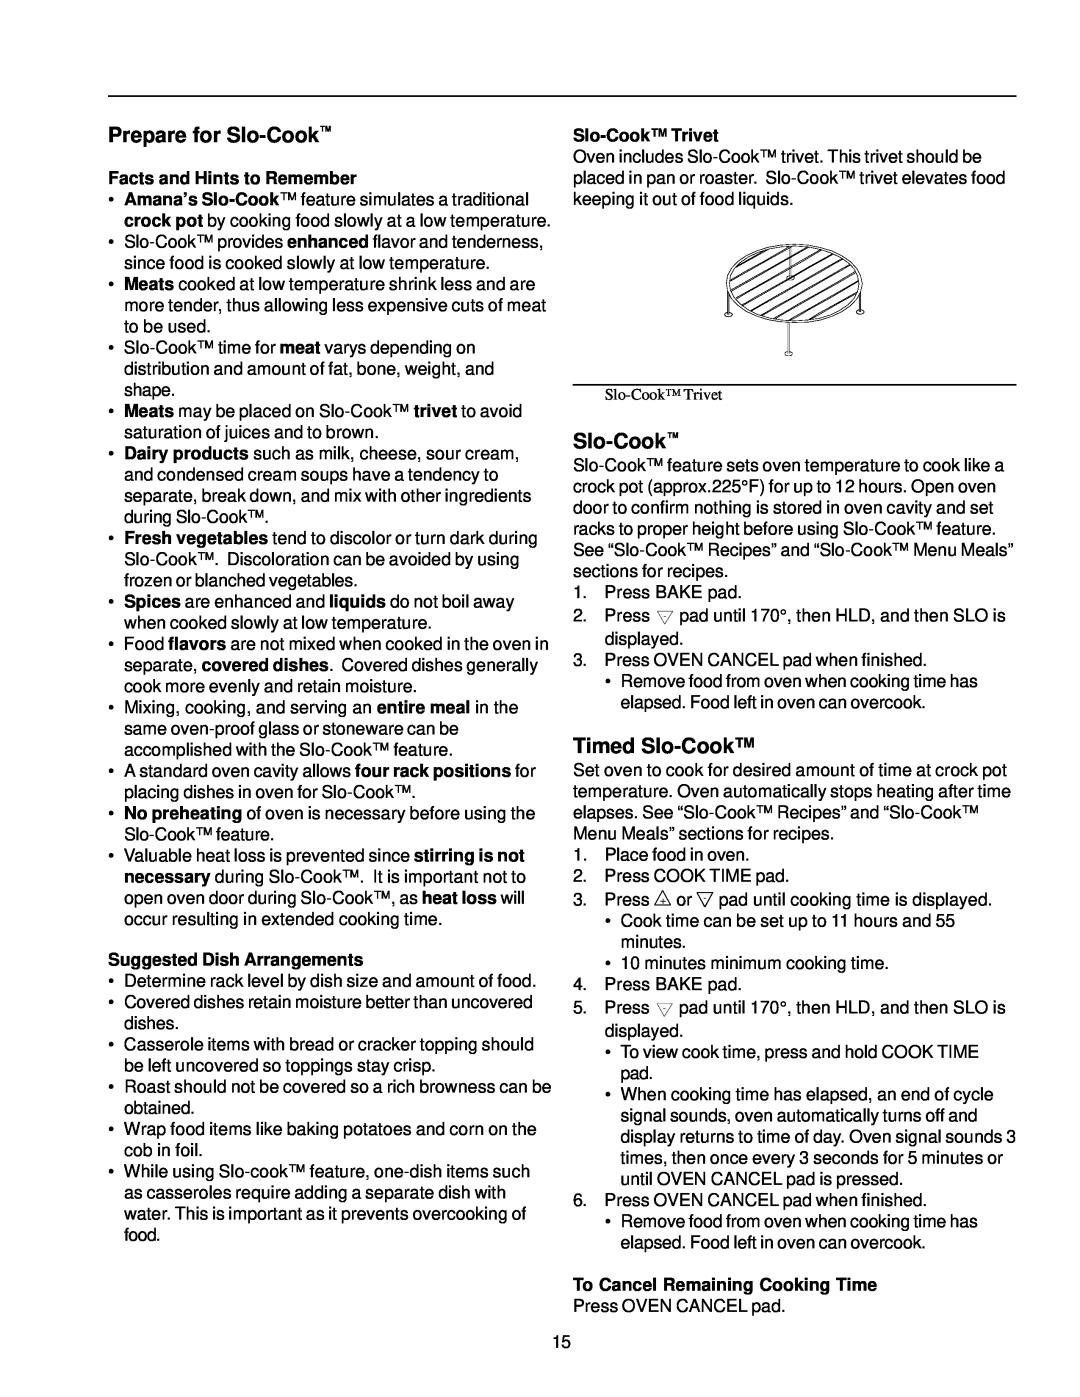 Amana AOCD2770 owner manual Prepare for Slo-Cook, Timed Slo-Cook, Facts and Hints to Remember, Suggested Dish Arrangements 